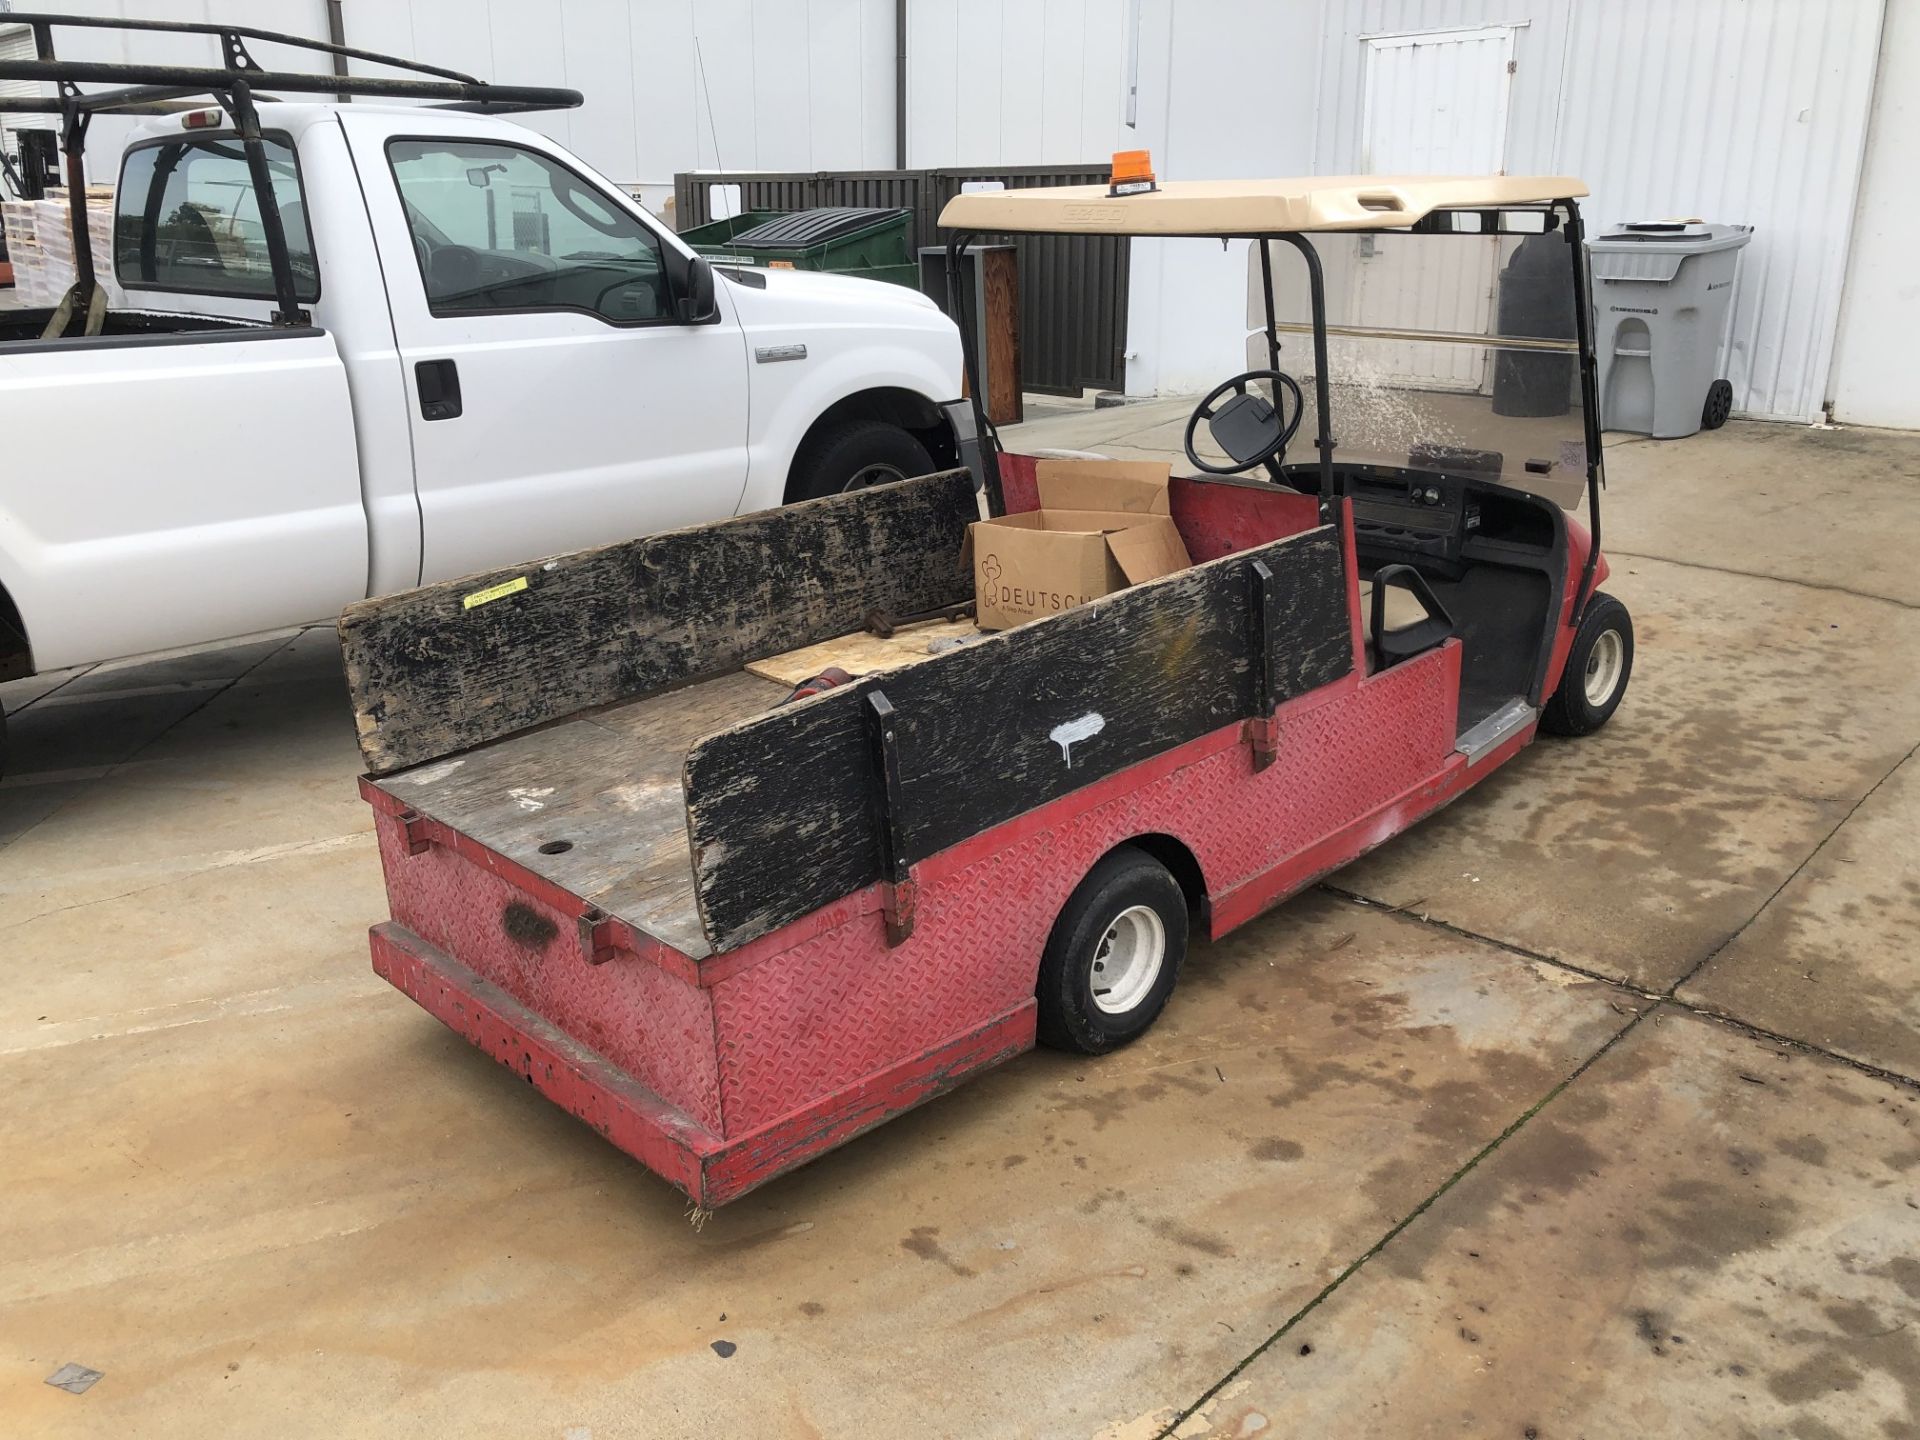 E-Z-GO Flatbed Utility Cart, Manufacturing Code: B2698 - Image 3 of 5